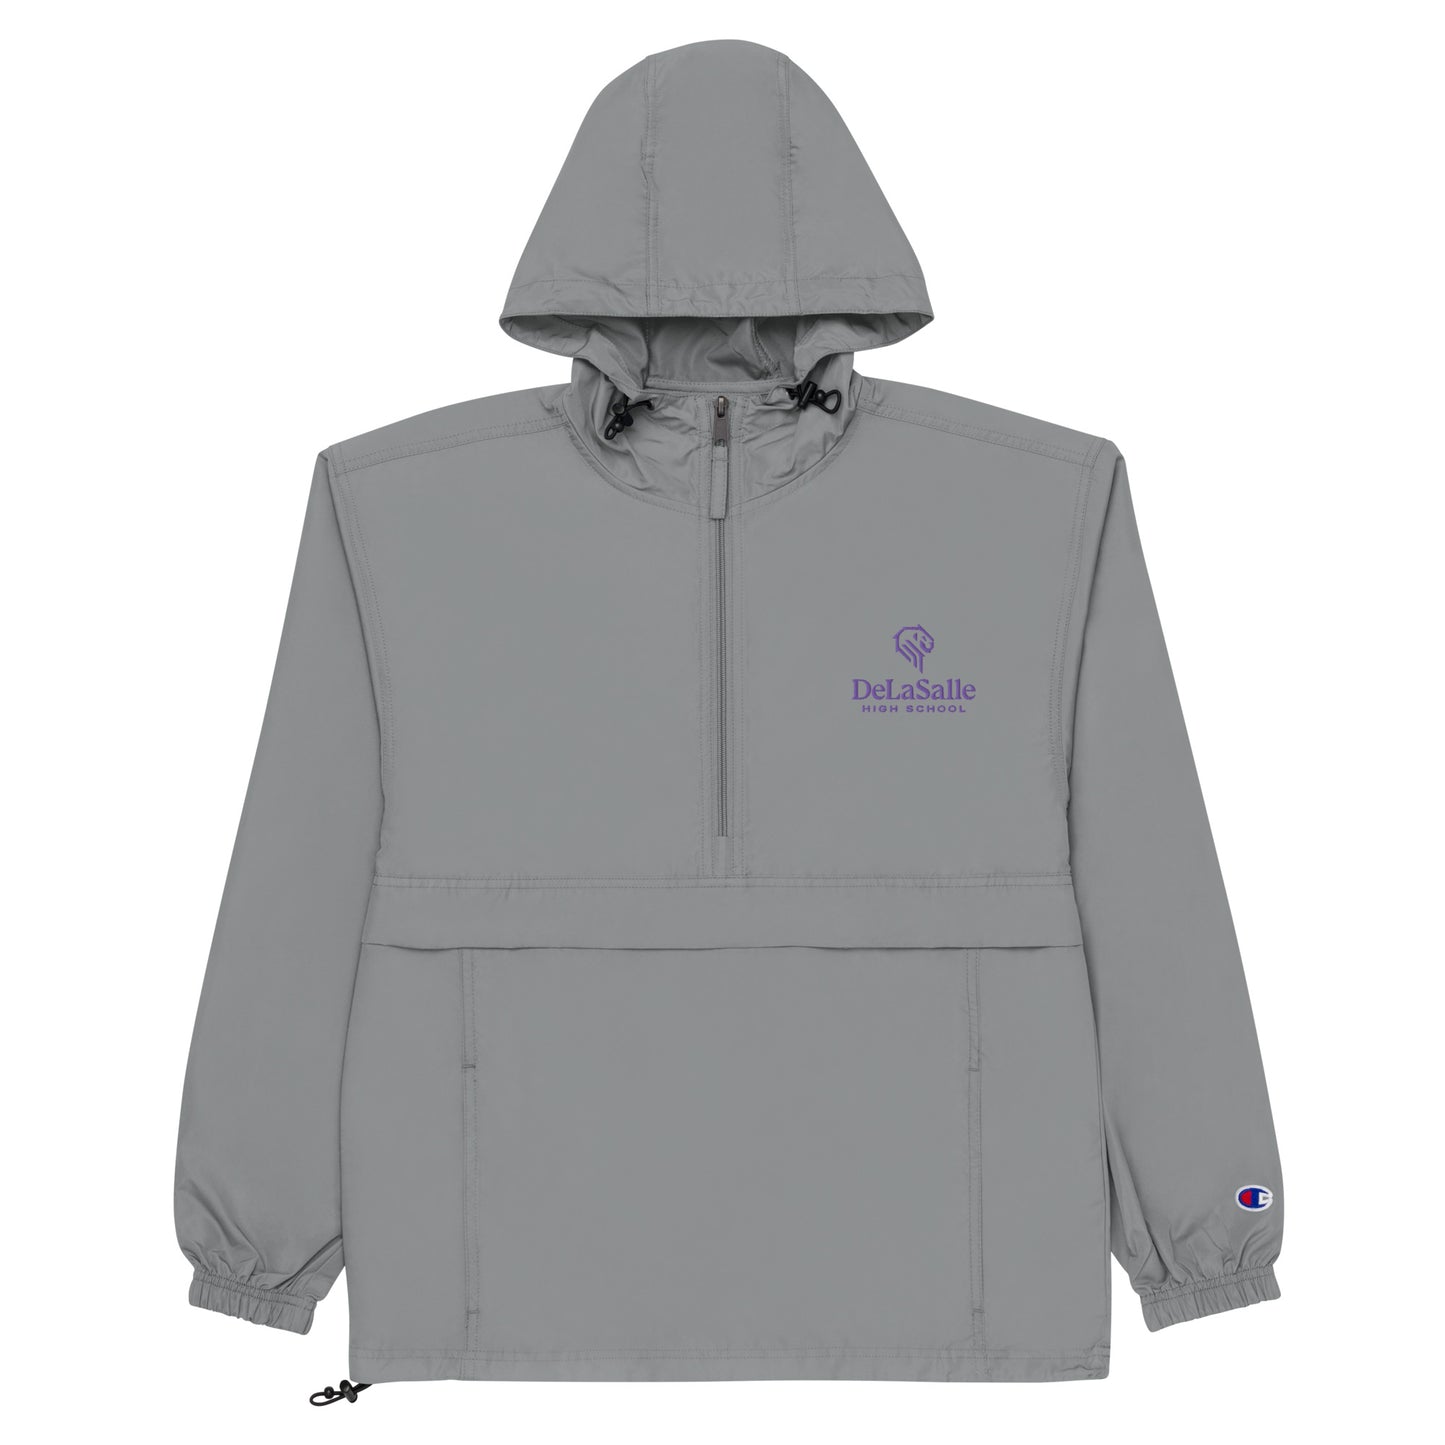 DeLaSalle Embroidered Champion Packable Jacket